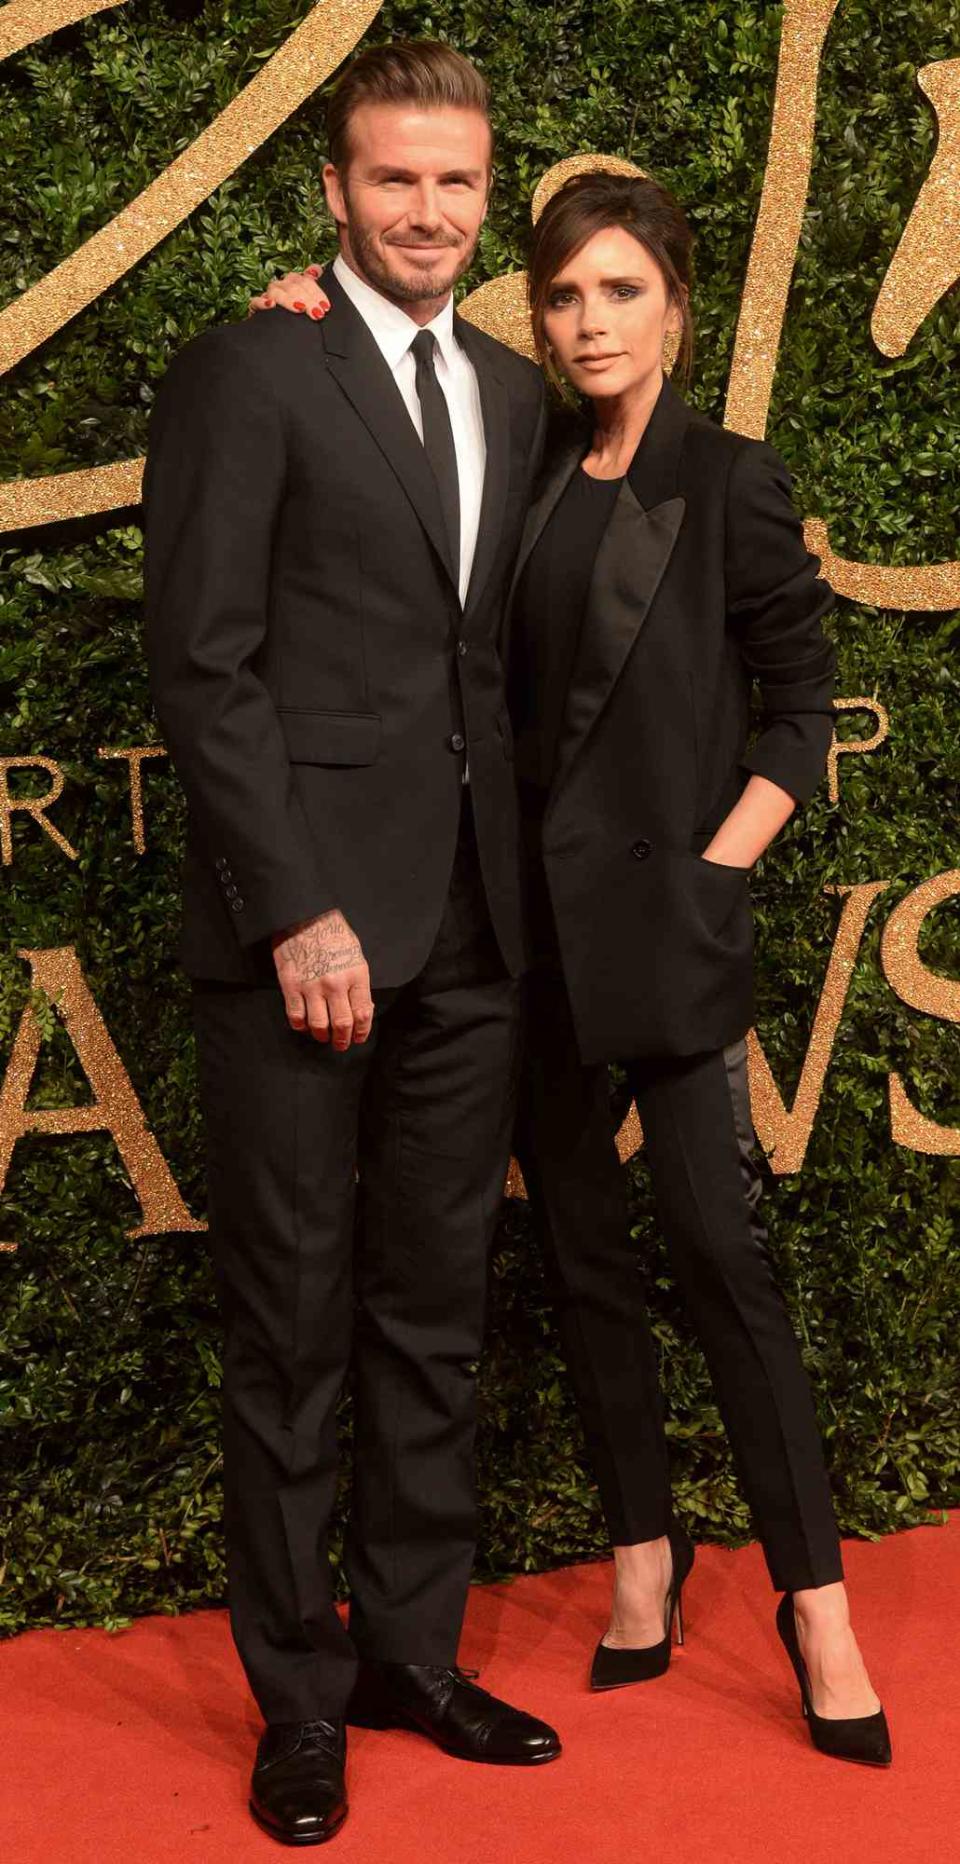 David and Victoria Beckham attend the British Fashion Awards at The Coliseum